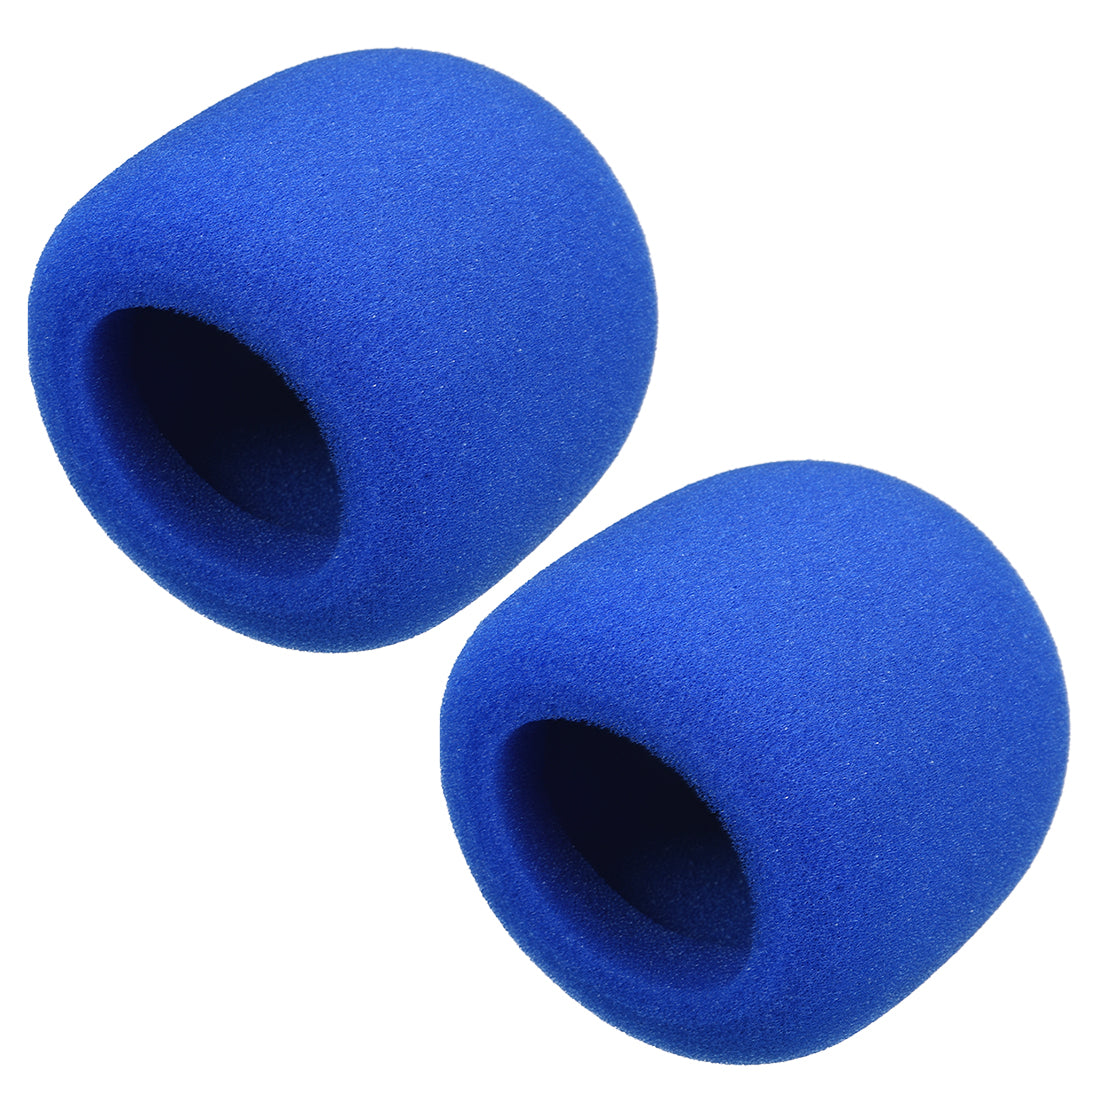 uxcell Uxcell 2PCS Thicken Sponge Foam Mic Cover Handheld Microphone Windscreen Blue for KTV